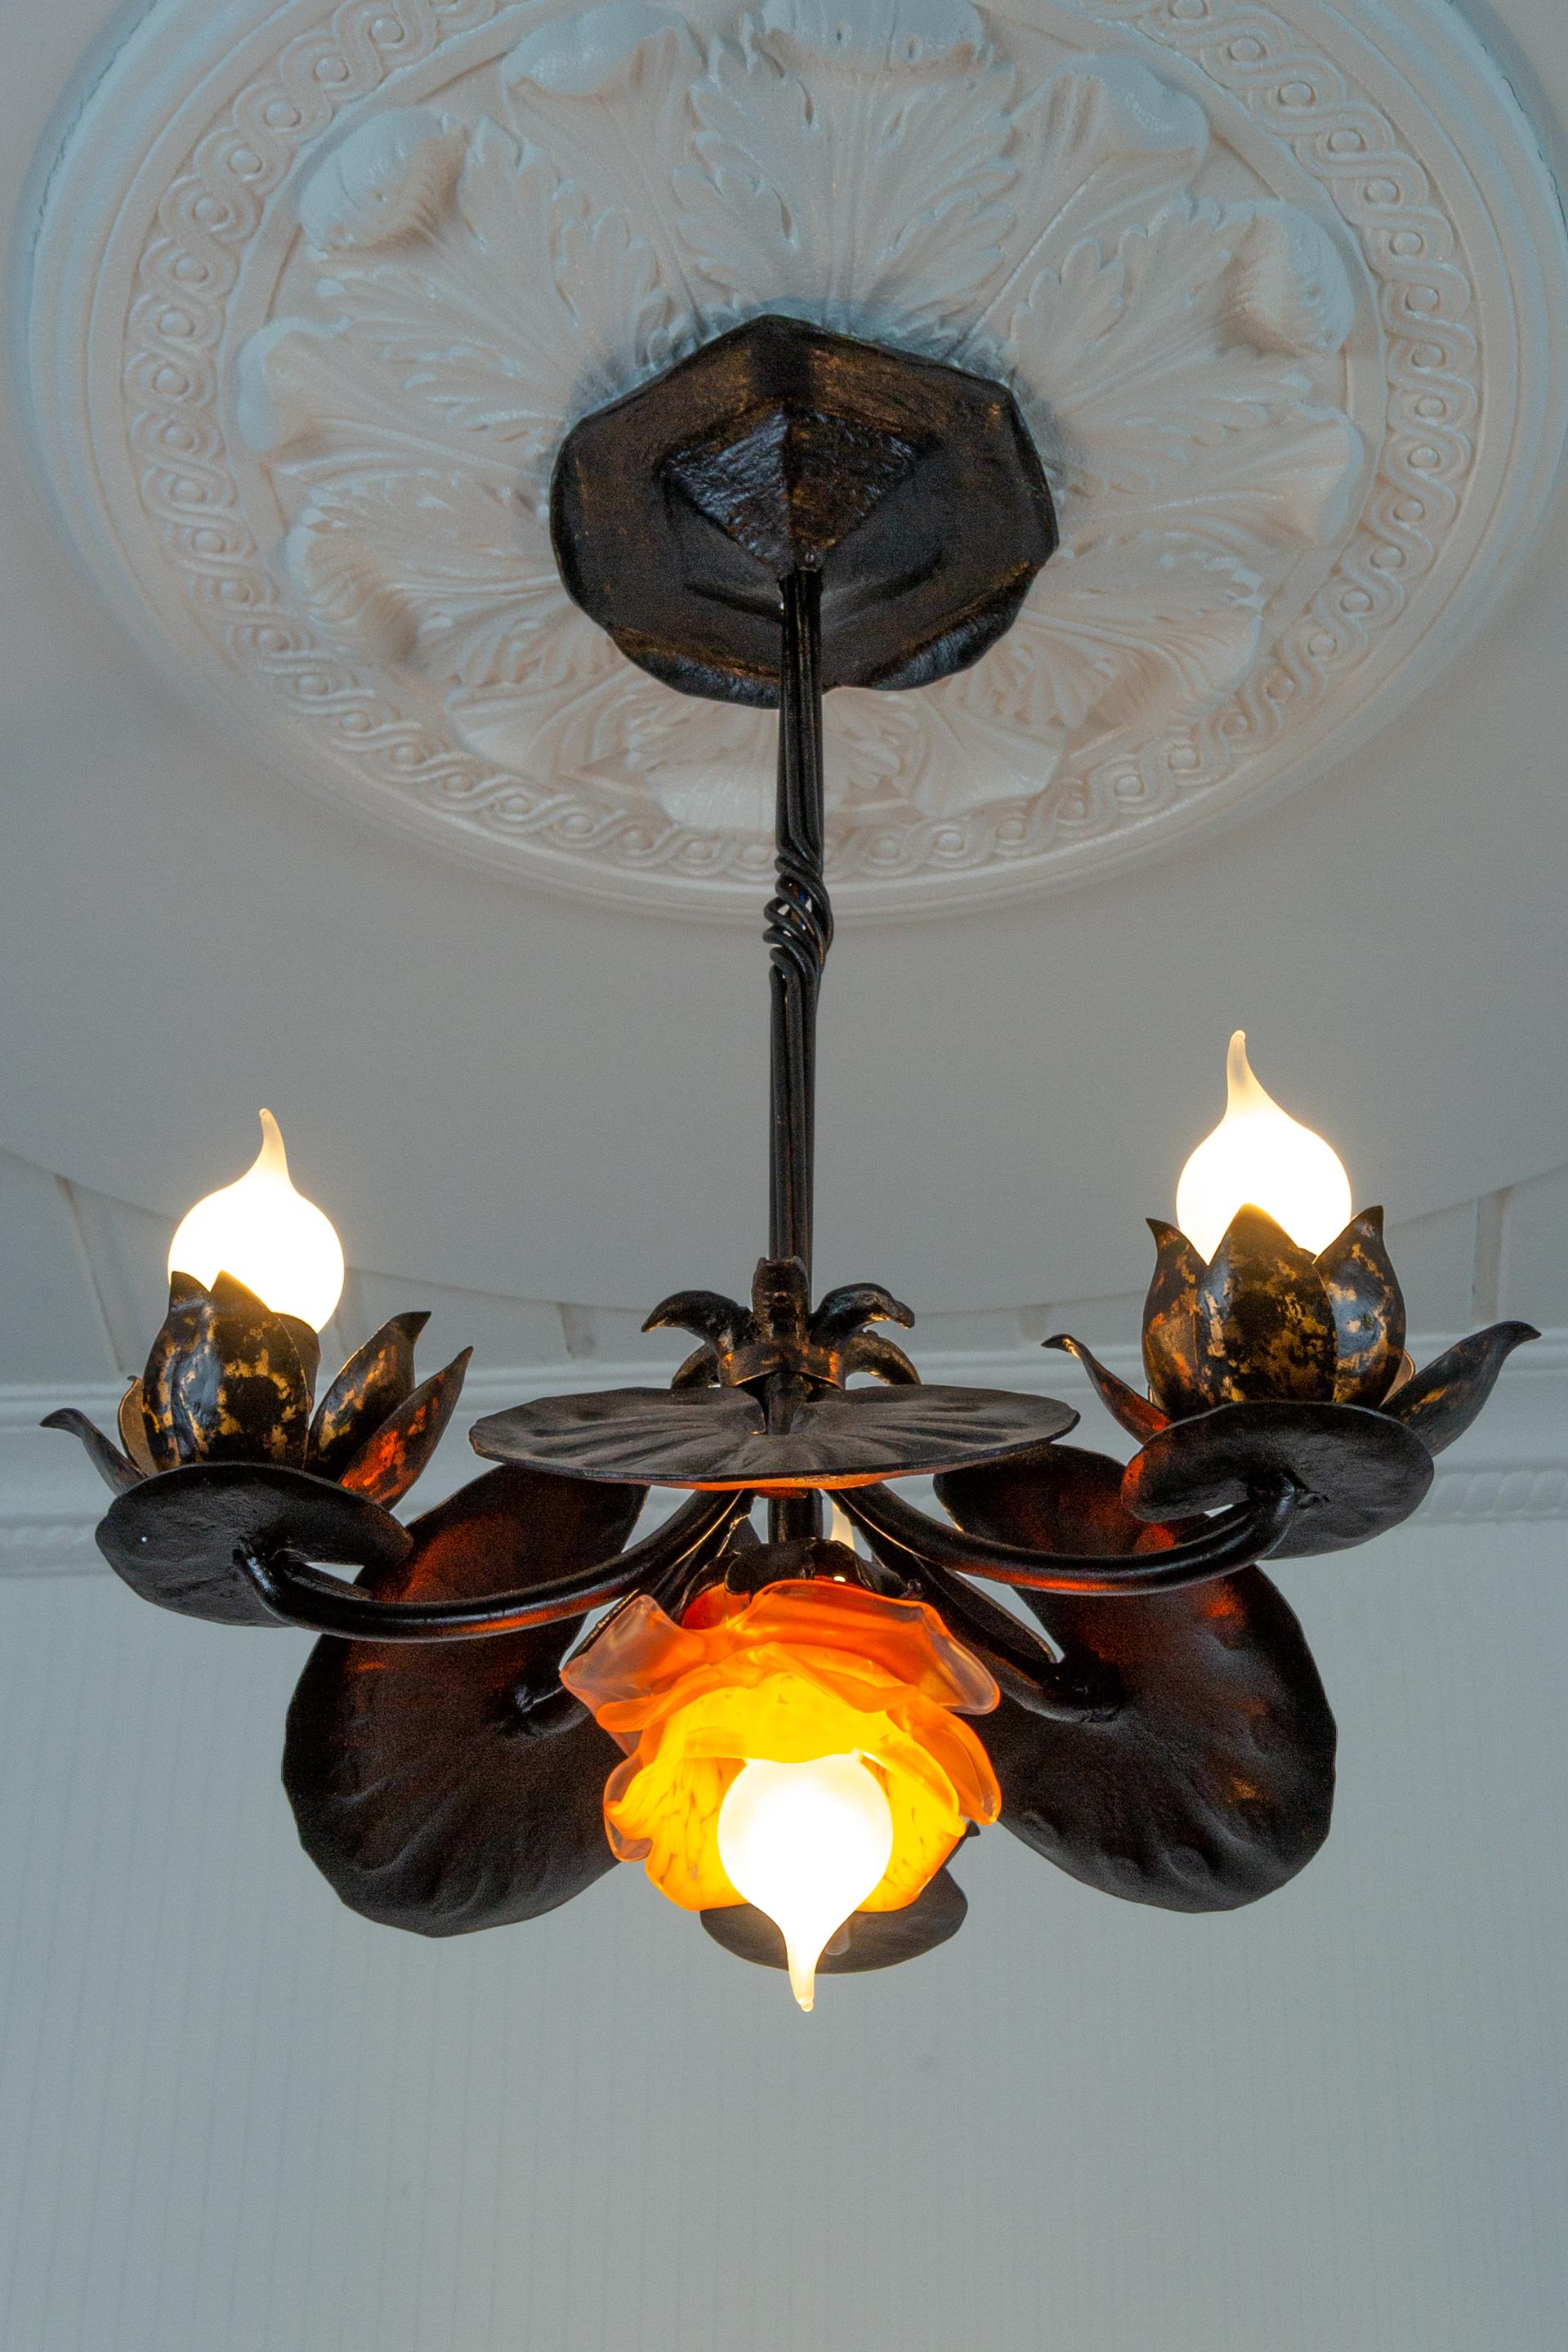 Adorable wrought iron chandelier with three points of light directed upwards in the shape of a water lily, petals decorated with red gold color patina. Bobeches are small stylized water lily pads. A beautiful flower-shaped lampshade made of orange